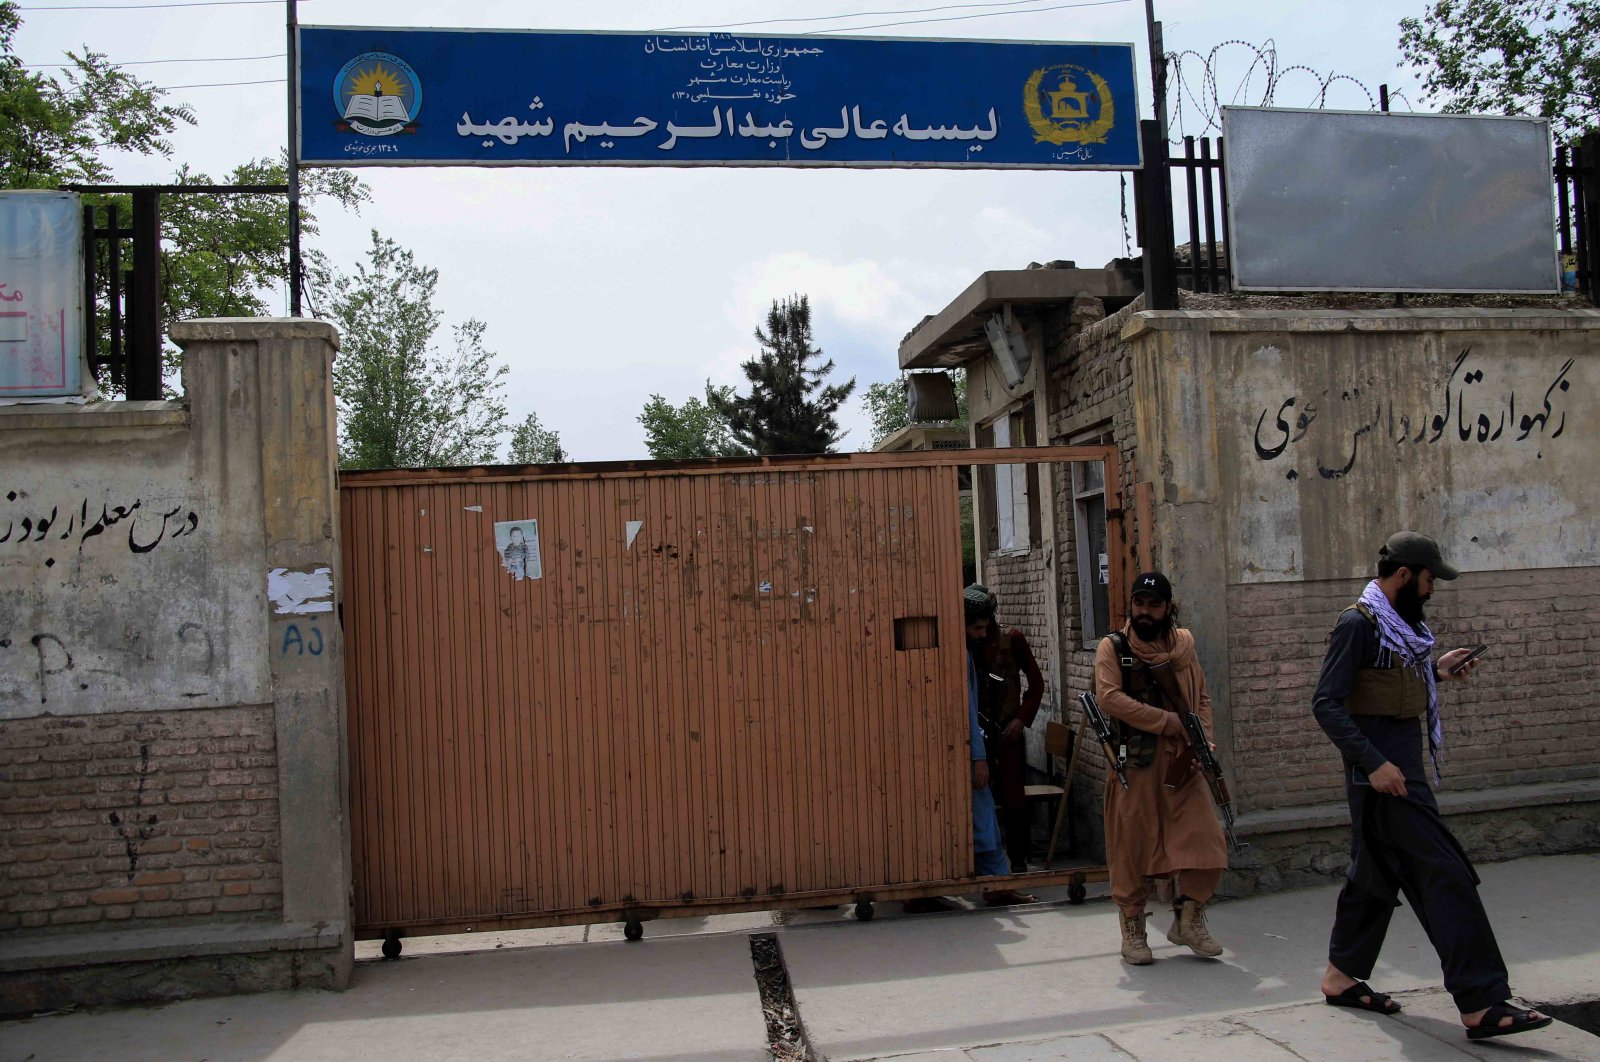 Taliban stand guard outside a school in the aftermath of multiple bomb blasts in a Shiite majority neighborhood, in Kabul, Afghanistan, April 19, 2022. (EPA Photo)